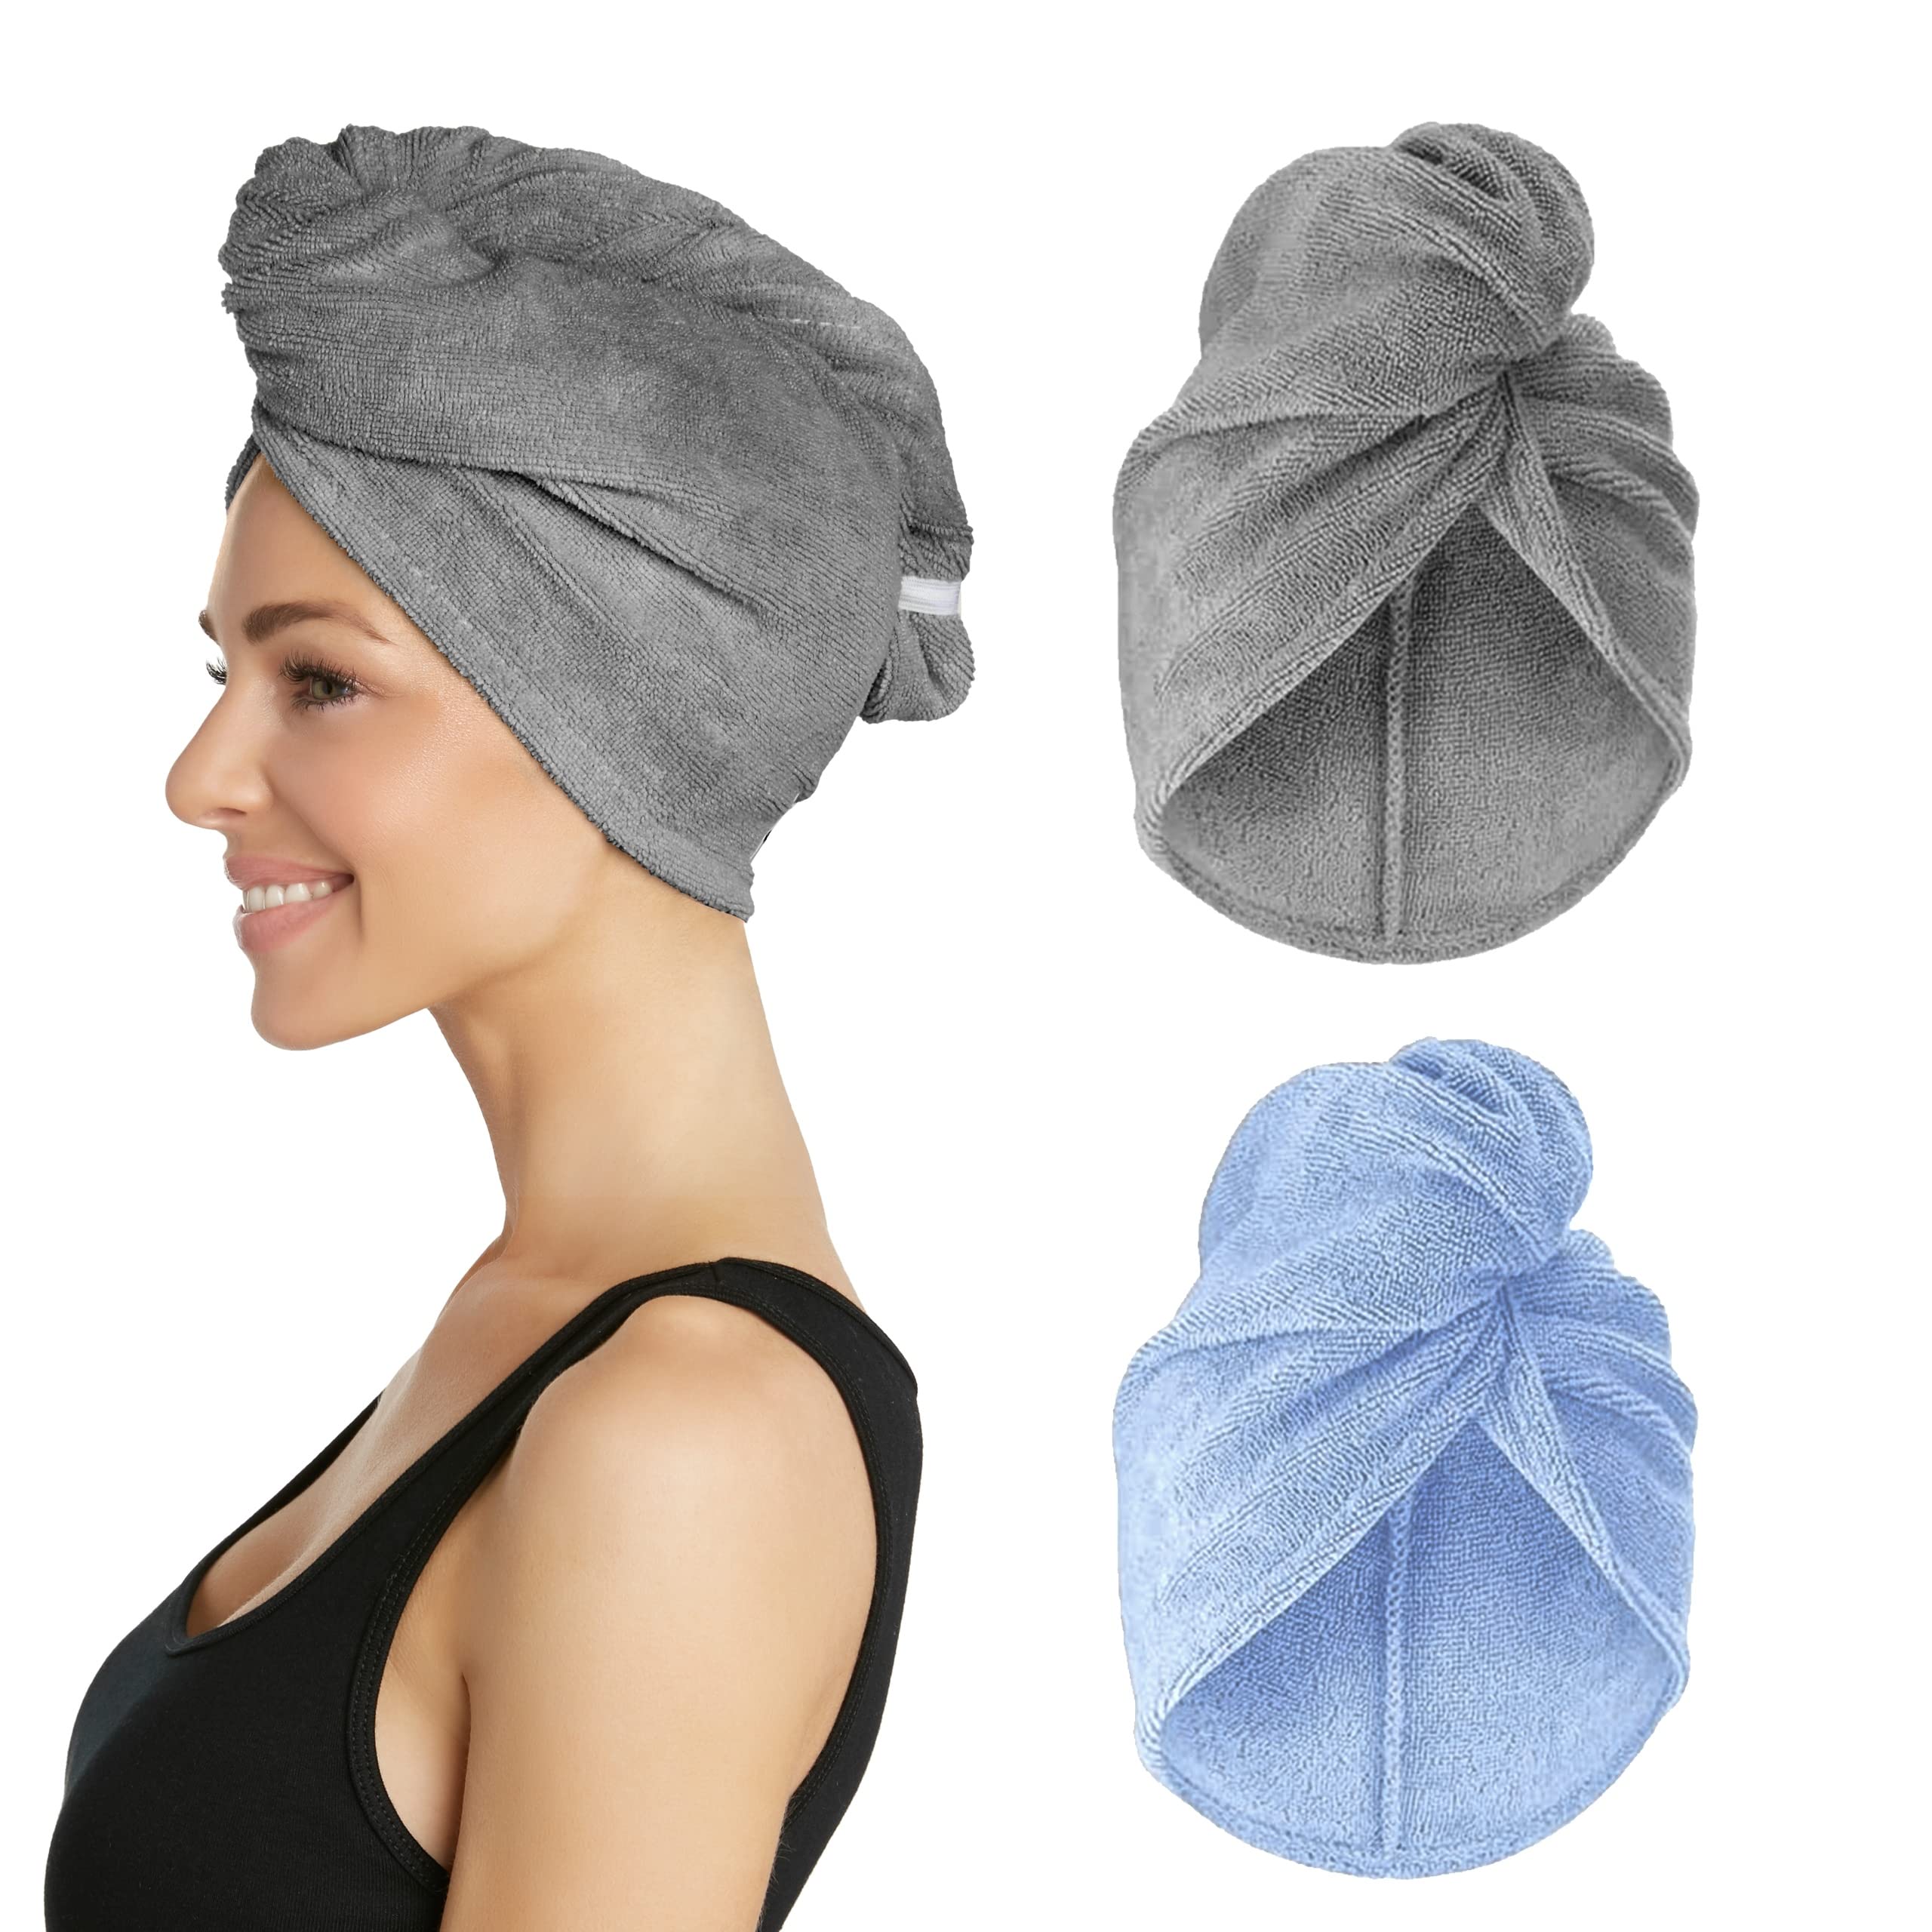 Book Cover Turbie Twist Microfiber Hair Towel Wrap for Women and Men | 2 Pack | Bathroom Essential Accessories | Quick Dry Hair Turban for Drying Curly, Long & Thick Hair (Grey, Blue) Gray / Blue